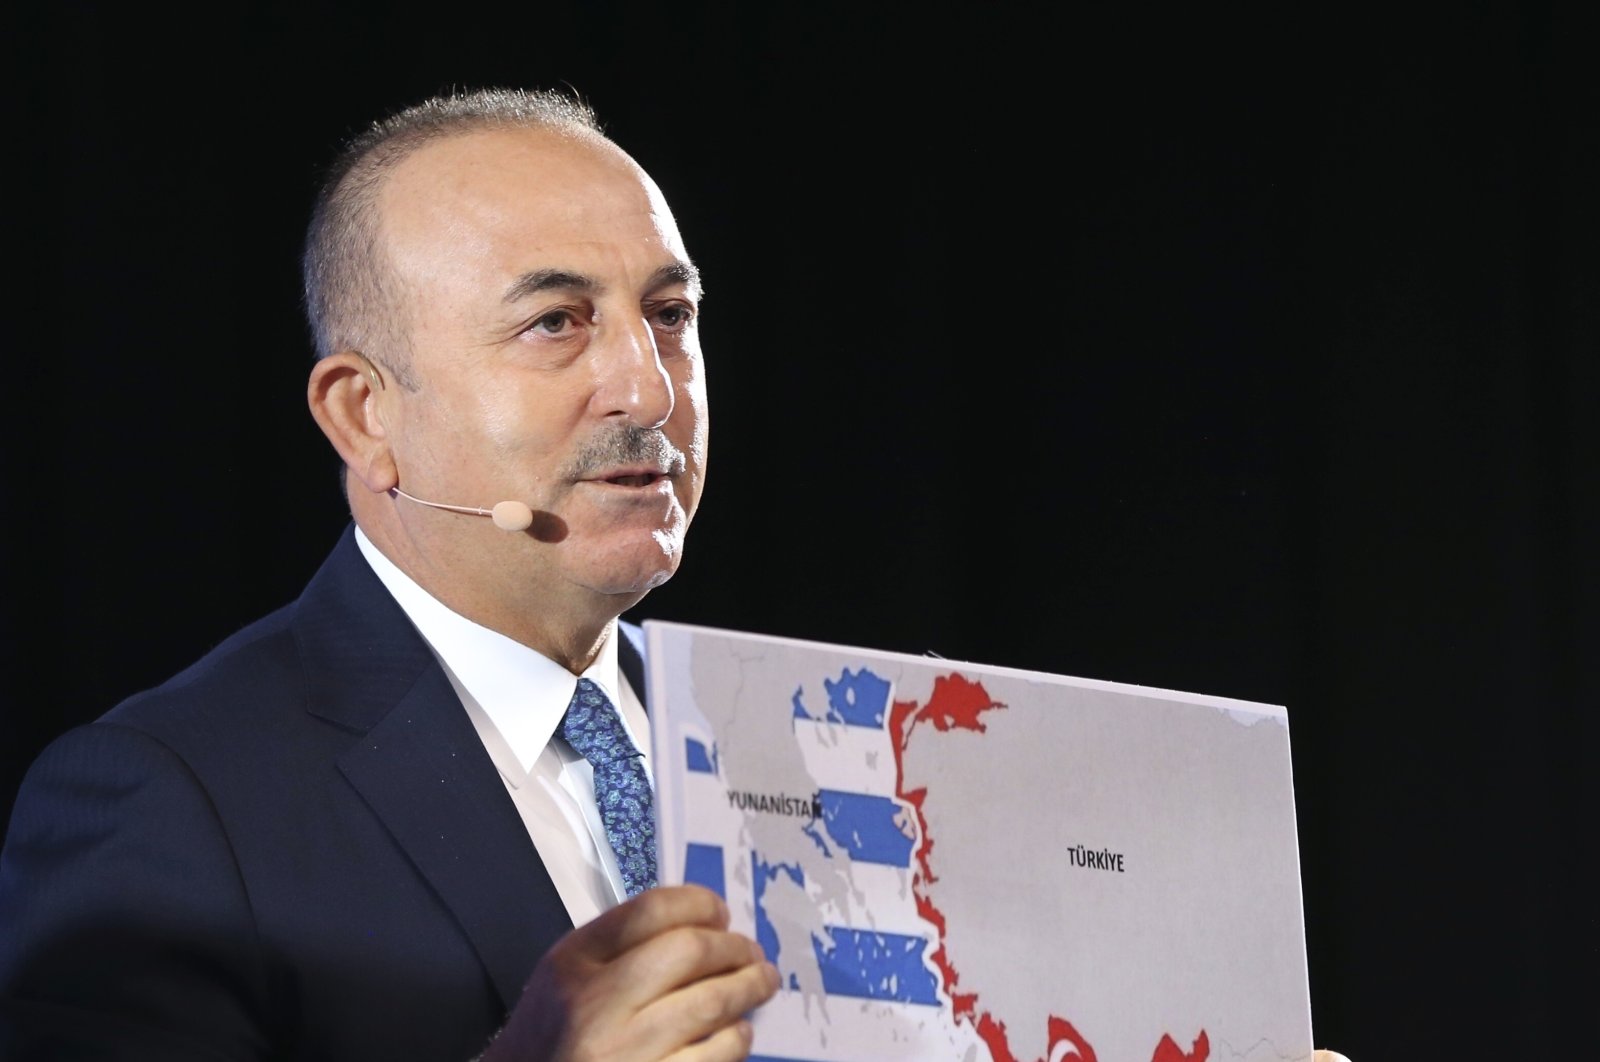 Foreign Minister Mevlüt Çavuşoğlu shows the Seville Map, which represents Greece and the Greek Cypriot administration's maximalist claims in the Eastern Mediterranean, as he speaks during a conference in Bratislava, Slovakia, Oct. 8, 2020. (AP Photo)